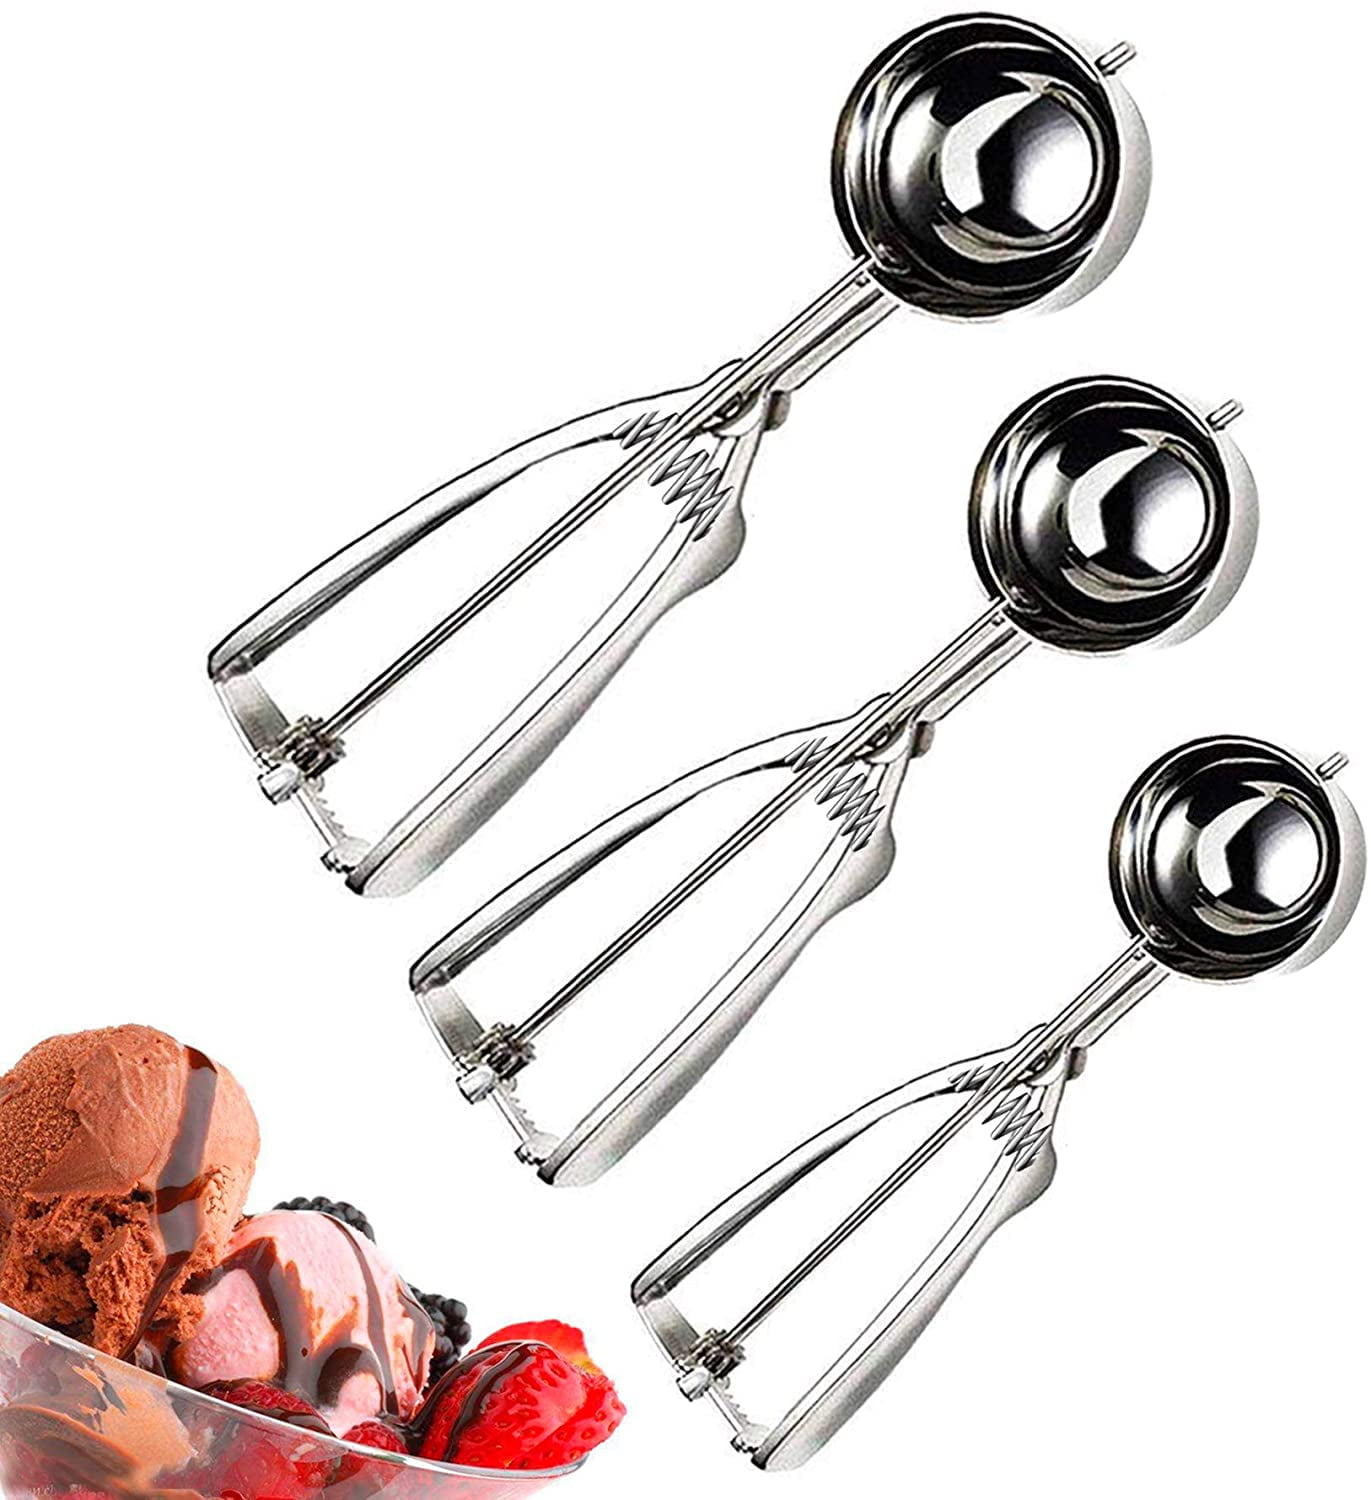 Fayomir Cookie Scoop Set - Small/1 Tablespoon, Medium/2 Tablespoon, Large/3 Tablespoon - Ice Cream Scoop Set, 18/8 Stainless Steel Dough Scoop Cupcake